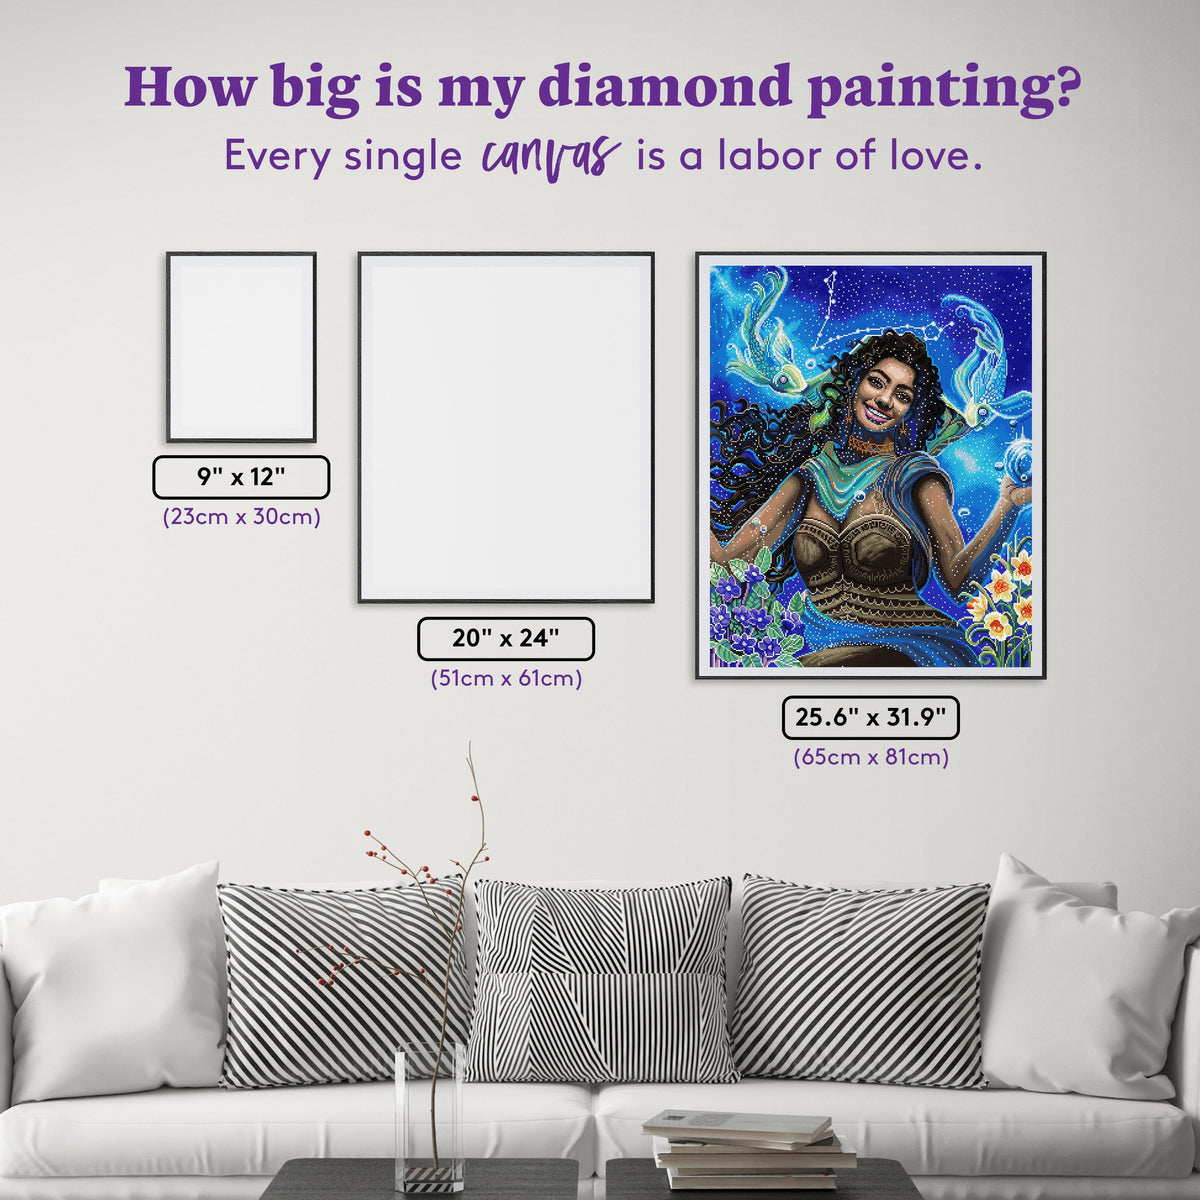 Diamond Painting Pisces 25.6" x 31.9" (65cm x 81cm) / Square with 67 colors including 3 ABs, 1 Electro Diamonds, 3 Fairy Dust Diamonds and 1 Special Diamonds / 84,749